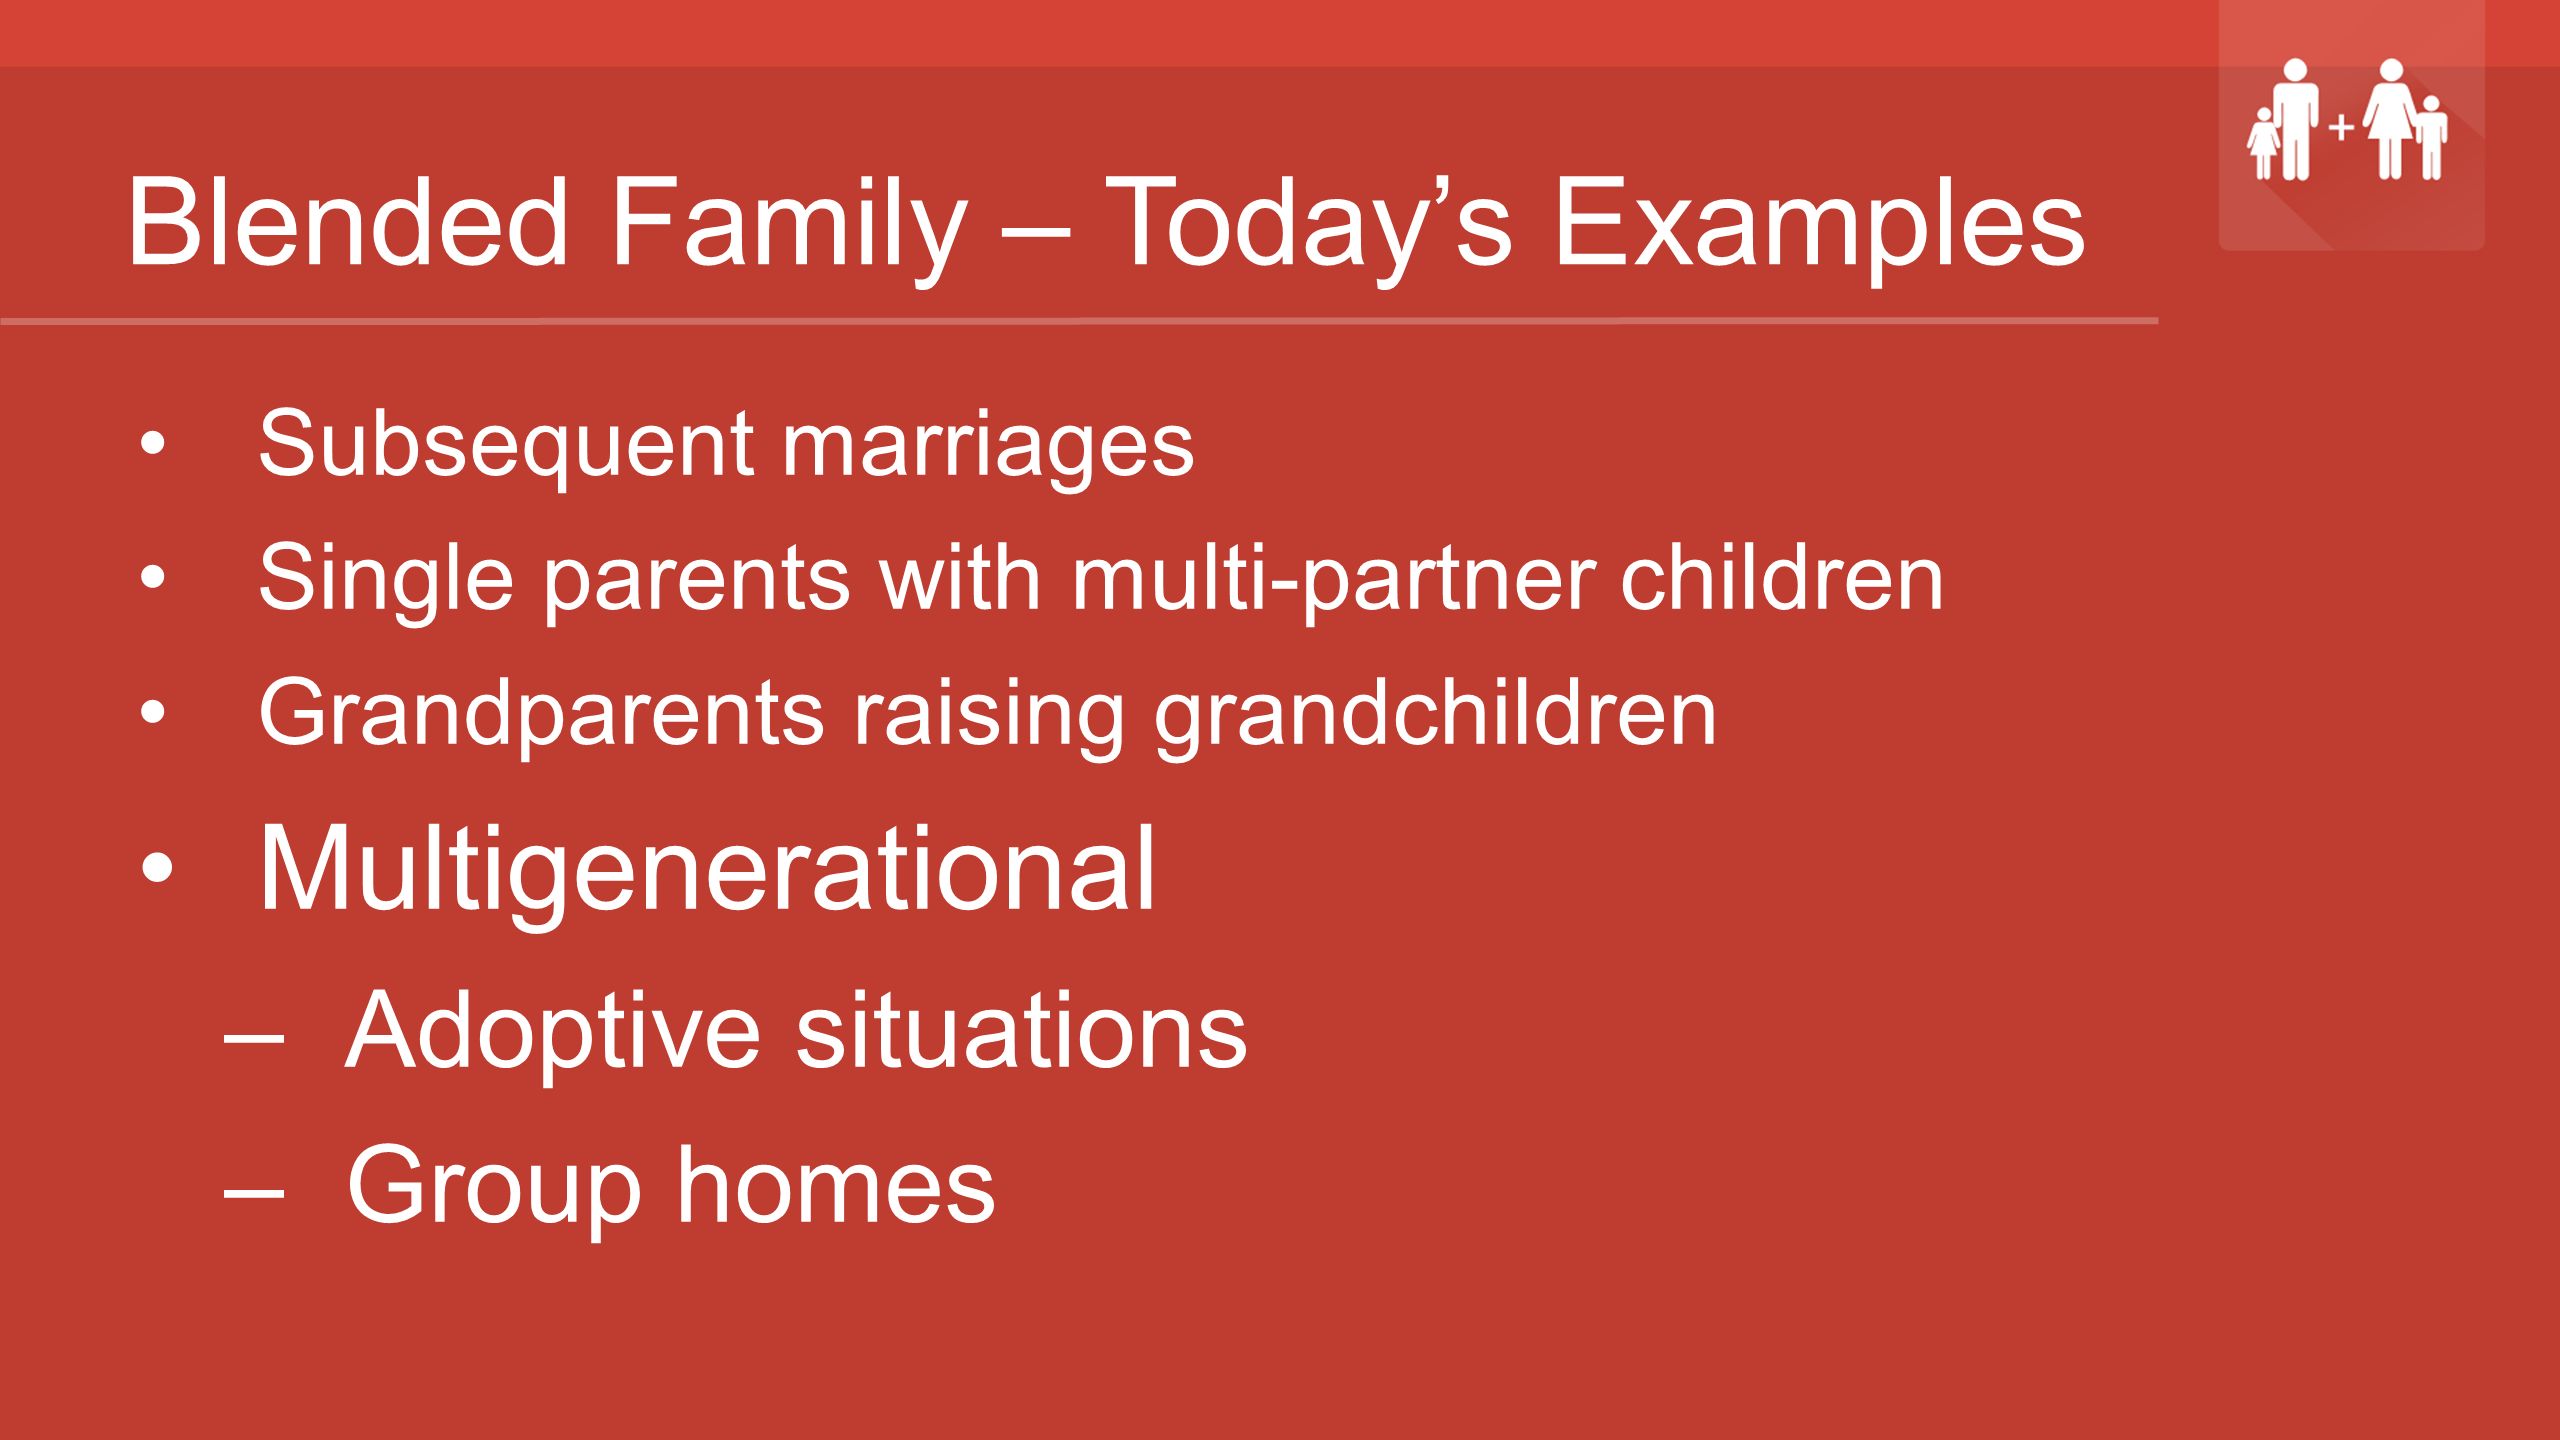 Blended Family – Today’s Examples Subsequent marriages Single parents with multi-partner children Grandparents raising grandchildren Multigenerational –Adoptive situations –Group homes